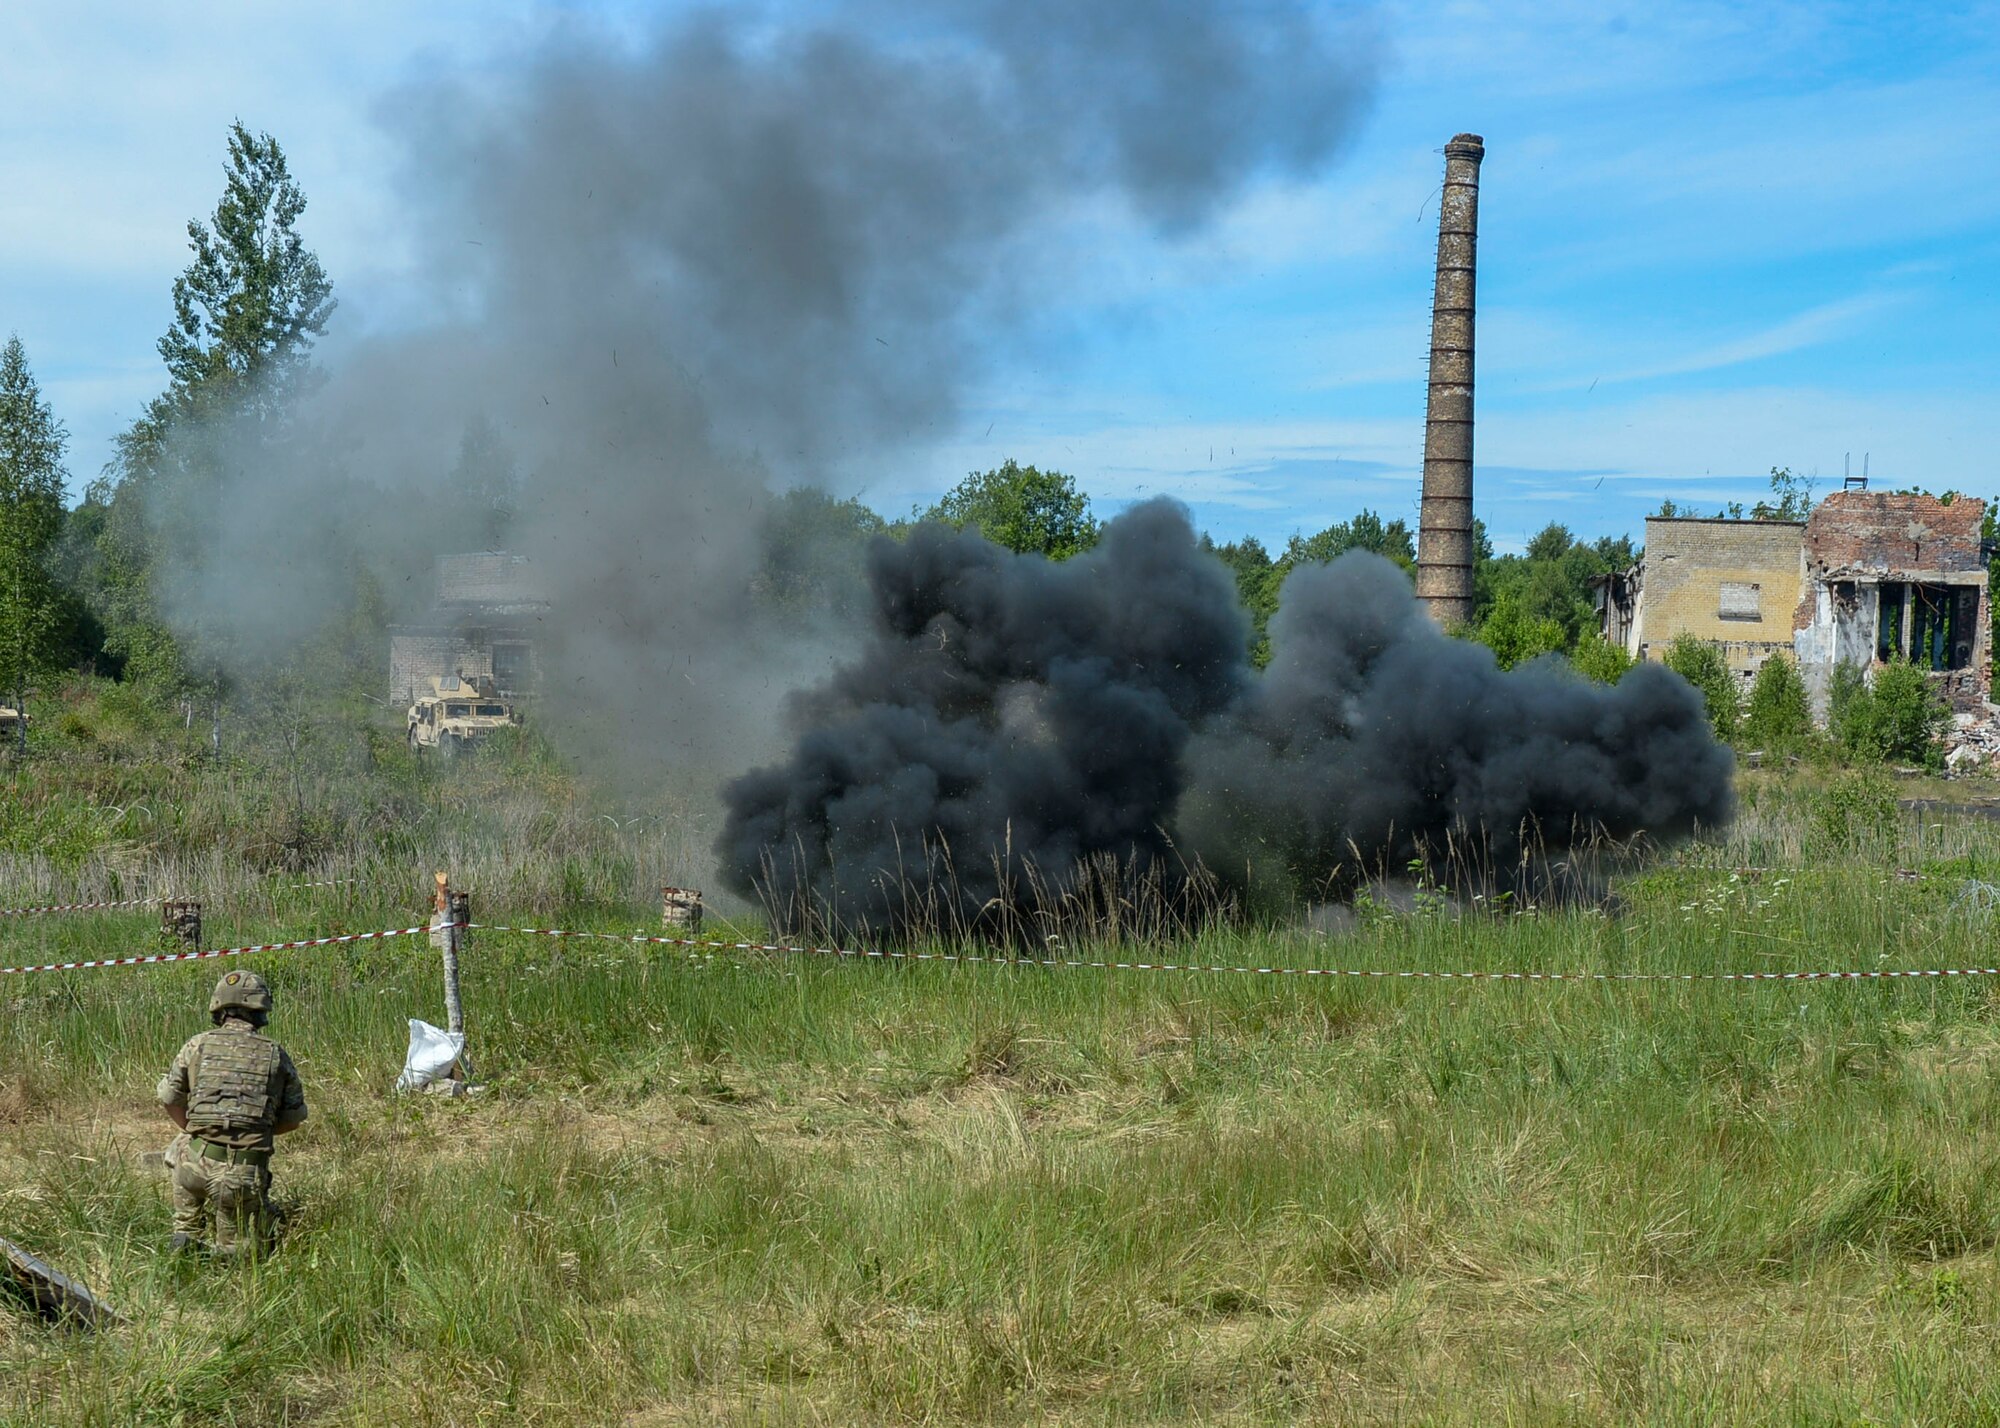 Explosive charges detonate on a simulated battlefield during a large scale battle scenario in Skrunda, Latvia on June 13, 2018. The scenario was a part of Saber Strike 18 and featured a defending force comprised of Spanish, Italian, Canadian and Latvian Platoons; and an attacking force comprised of U.S. Marines, United Kingdom Royal Marines, Michigan Army National Guard, and Norwegian Forces. (U.S. Air Force photo by Staff Sgt. Jimmie D. Pike)